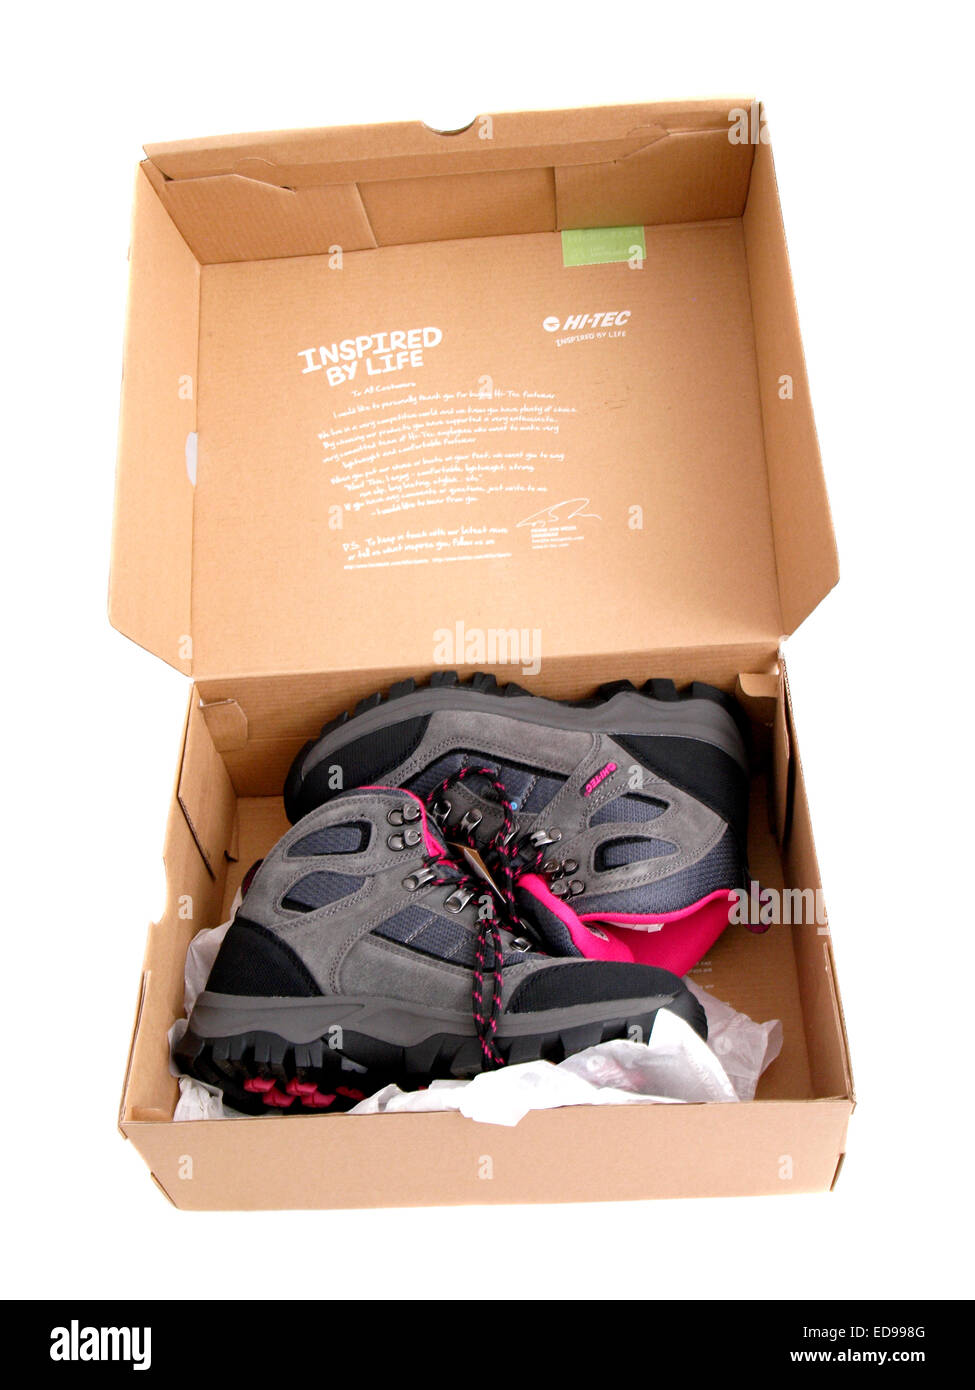 New hiking boots in box. Stock Photo